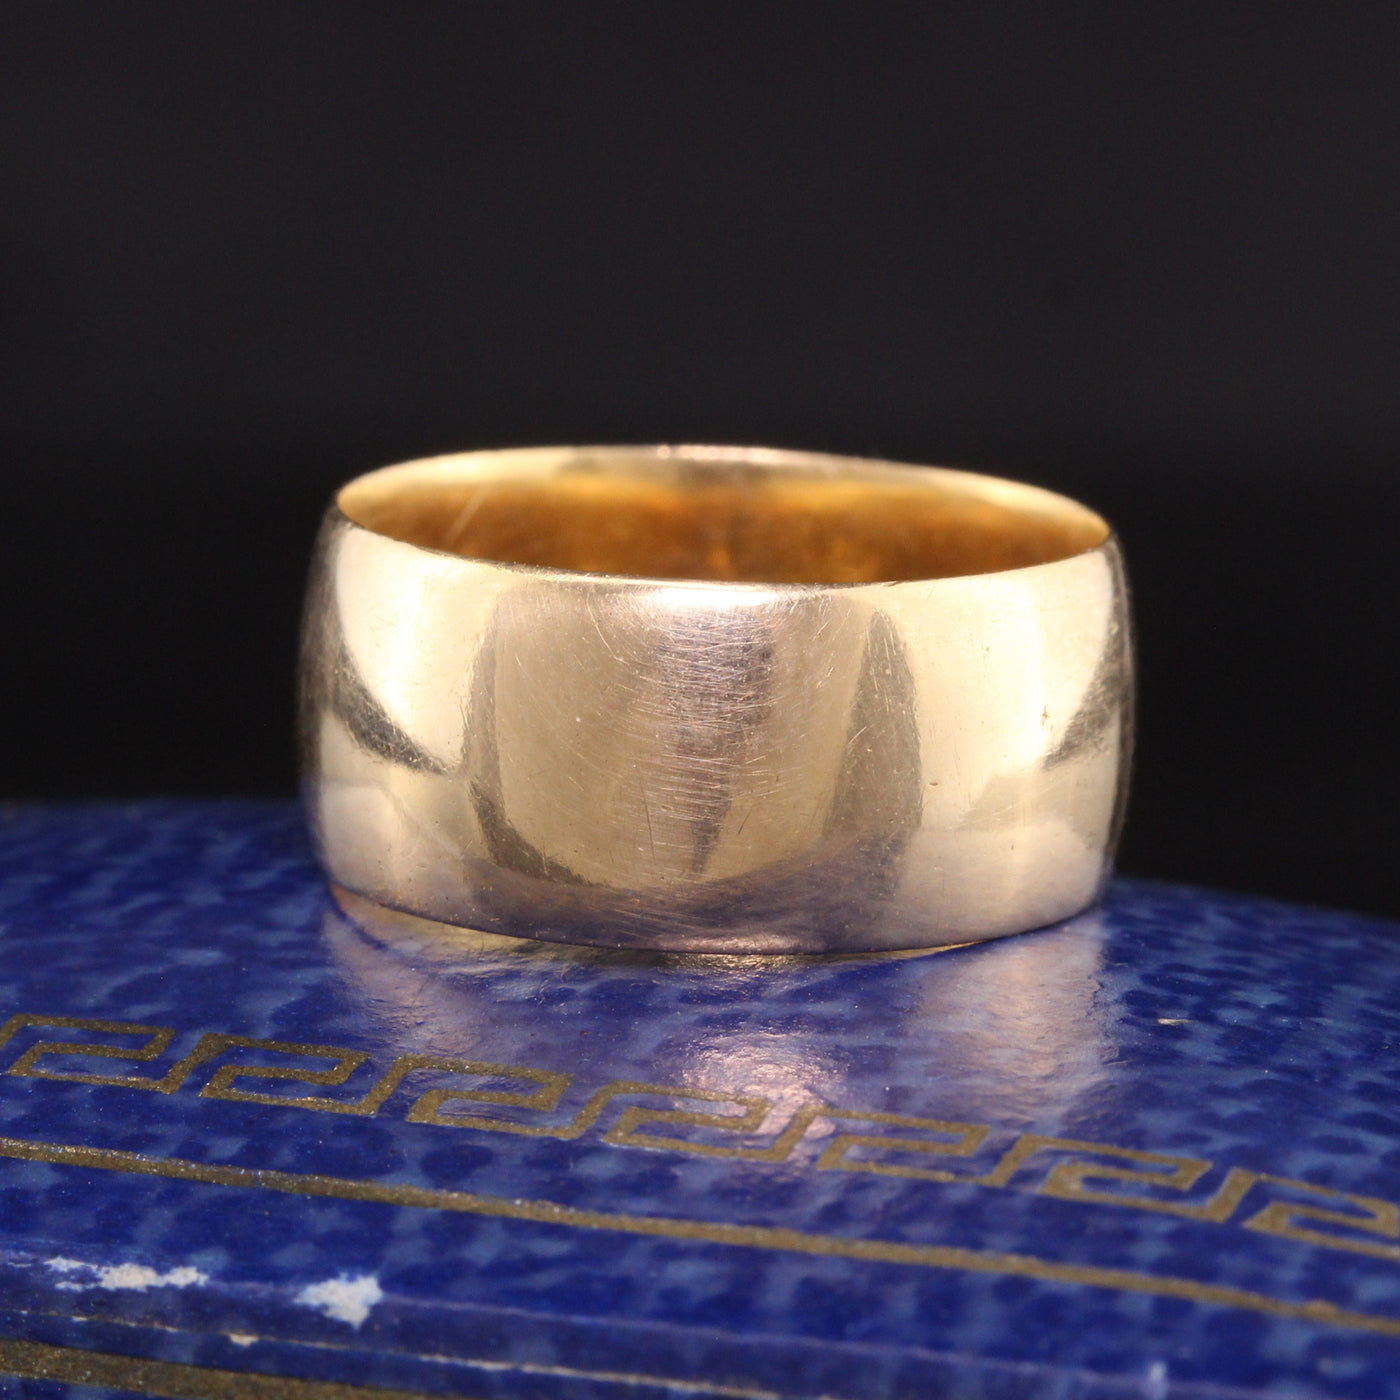 Antique Art Deco Mermod and Jaccard 18K Yellow Gold Wide Wedding Band